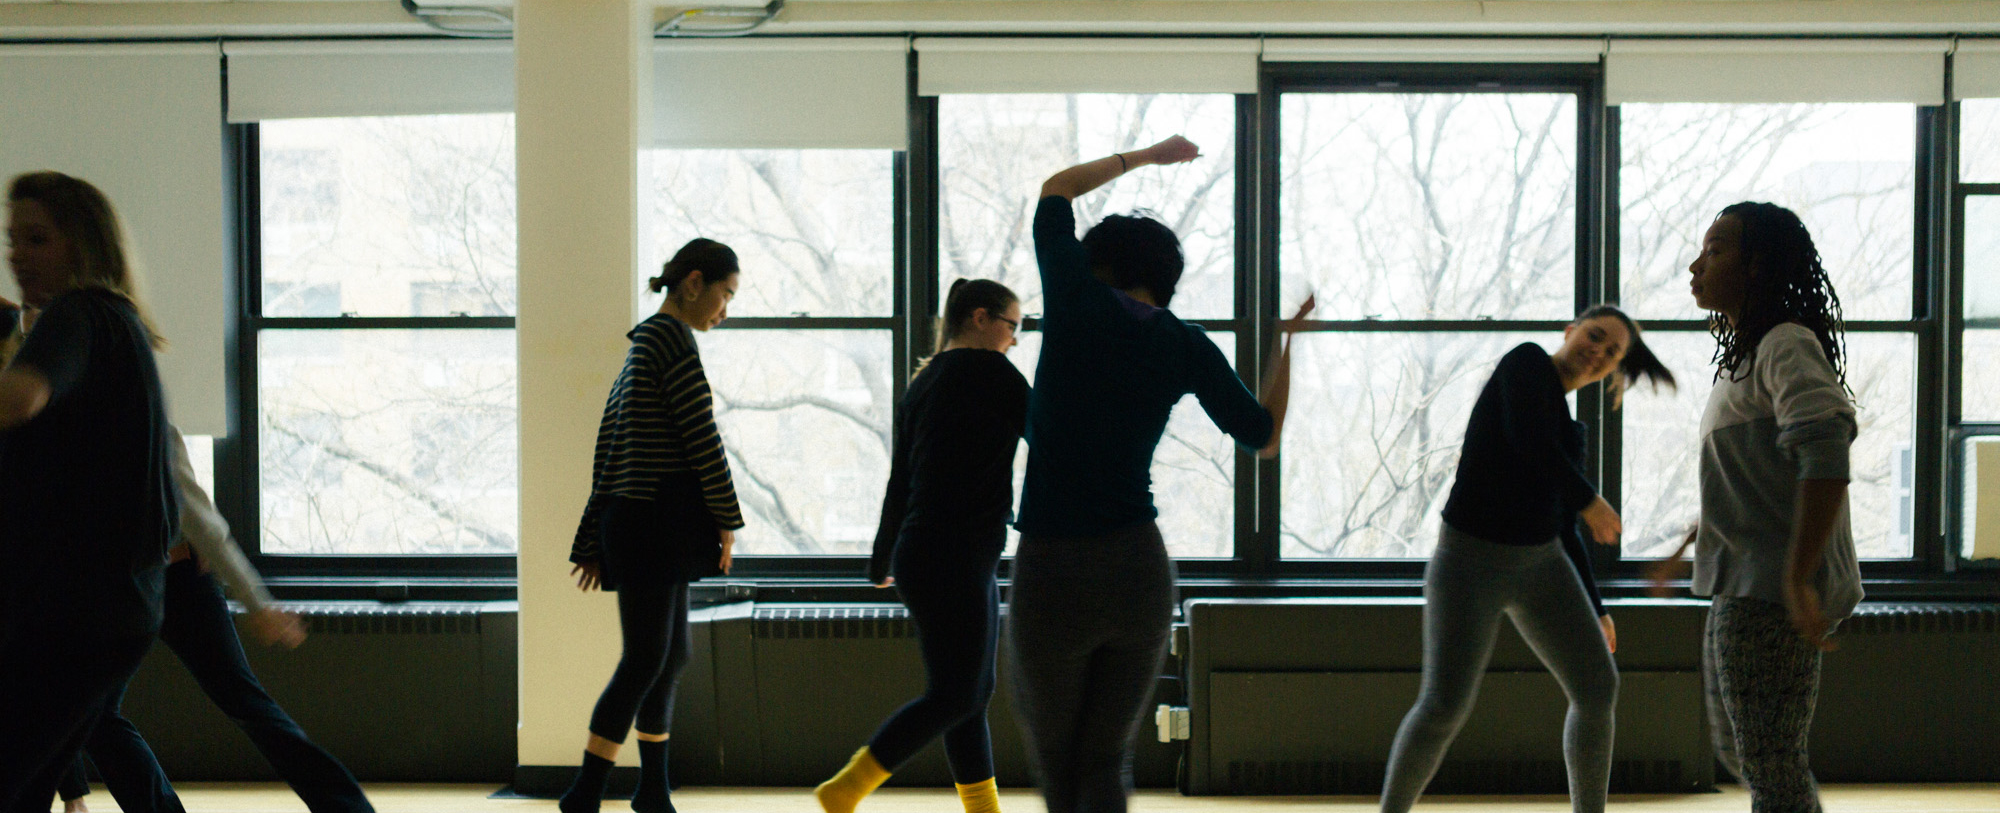 A group of dancers practice in a room with windows in the background.